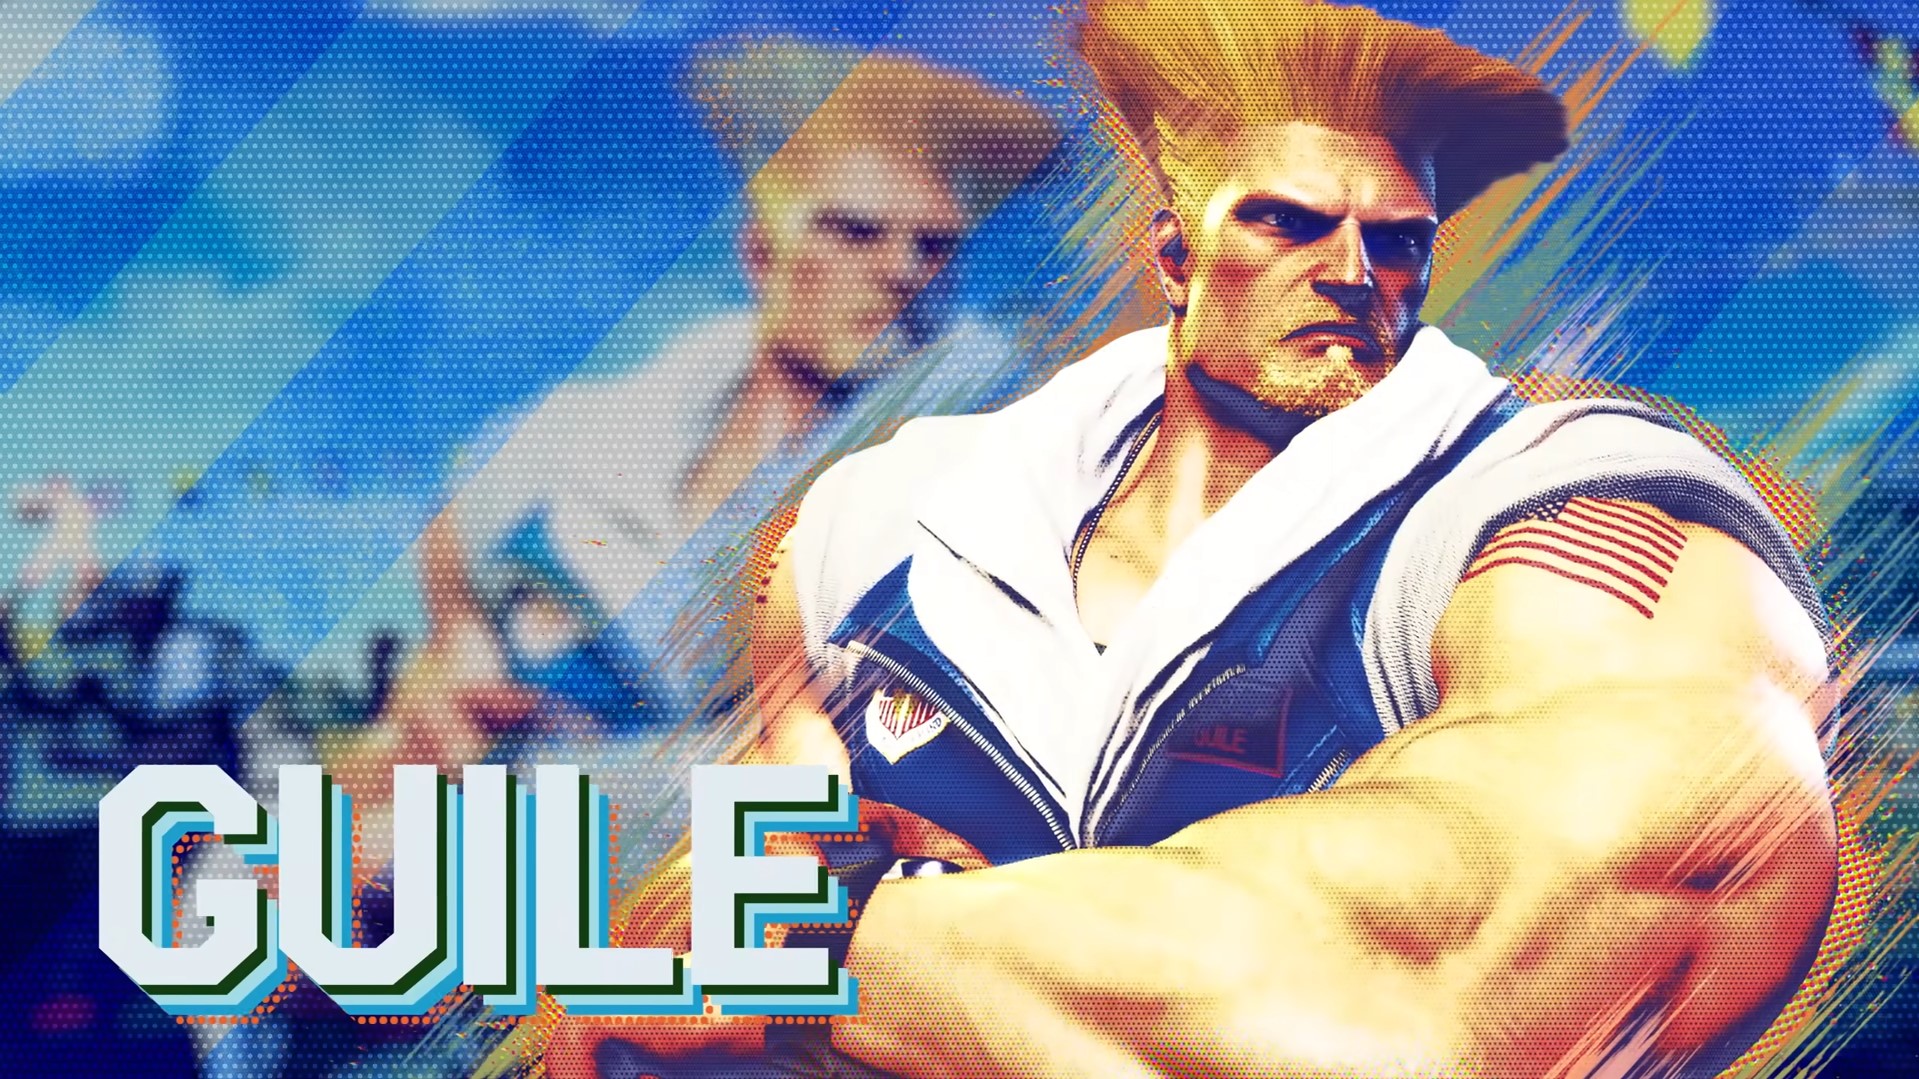 Street Fighter 6 Guile